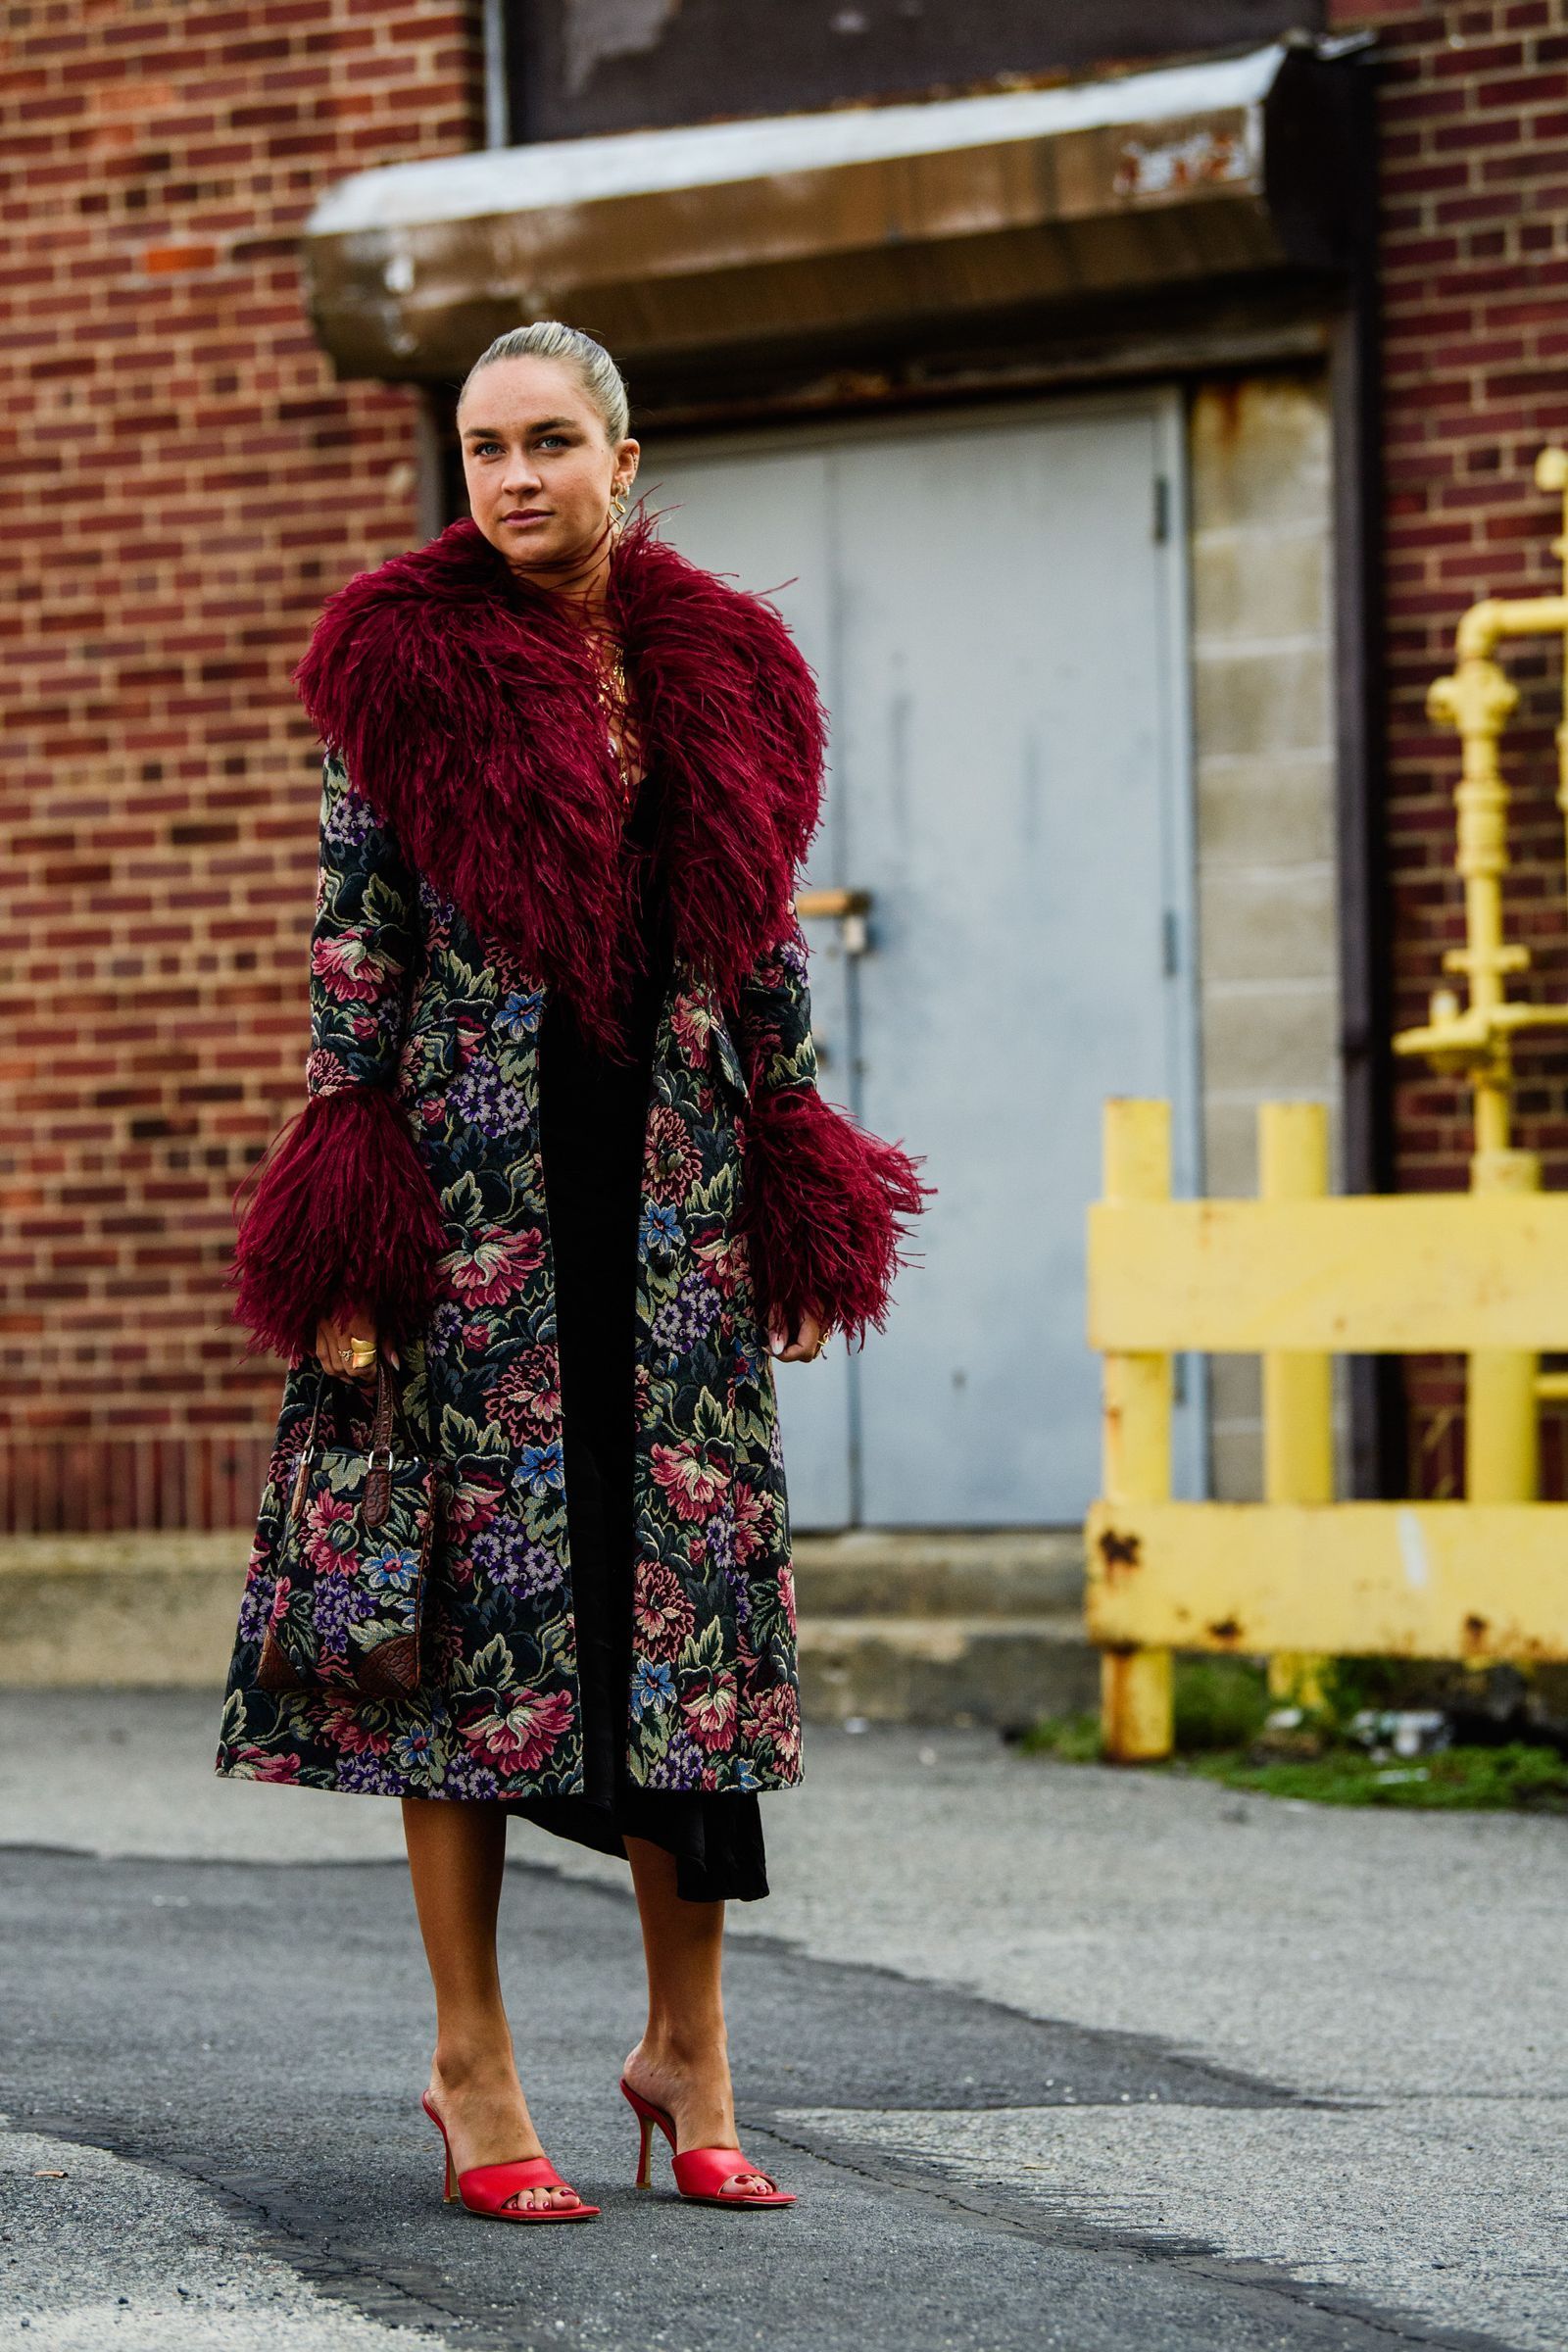 Every Must-See Street Style Outfit From New York Fashion Week - Every Must-See Street Style Outfit From New York Fashion Week -   19 style Street swag ideas